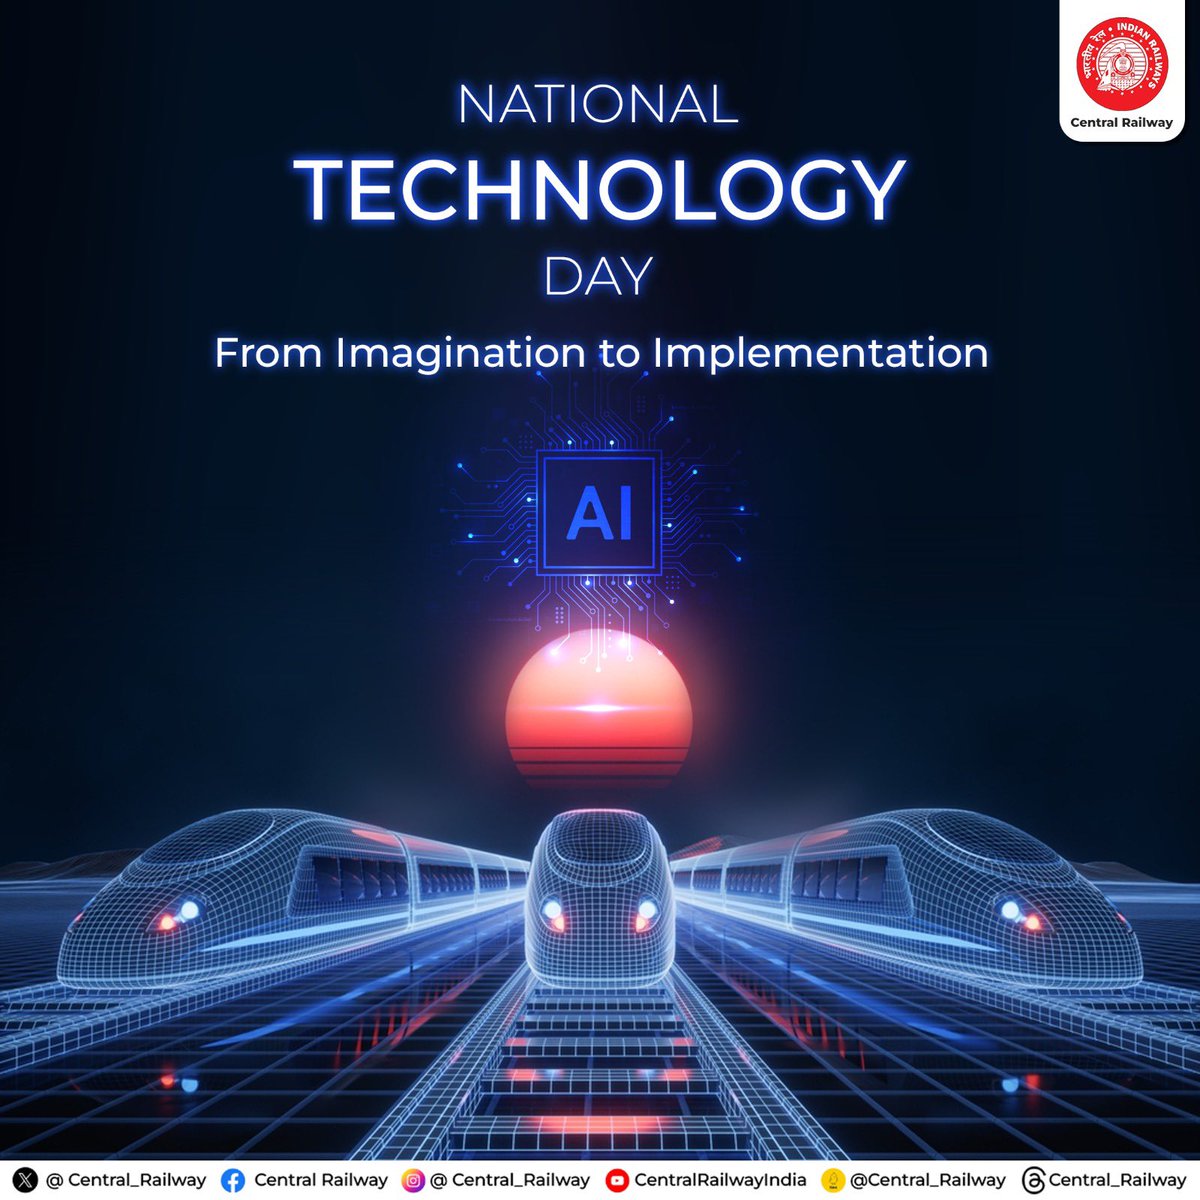 Here's to the dreamers, the creators, and the ones who make the impossible, possible. Happy National Technology Day! #CentralRailway #Technology